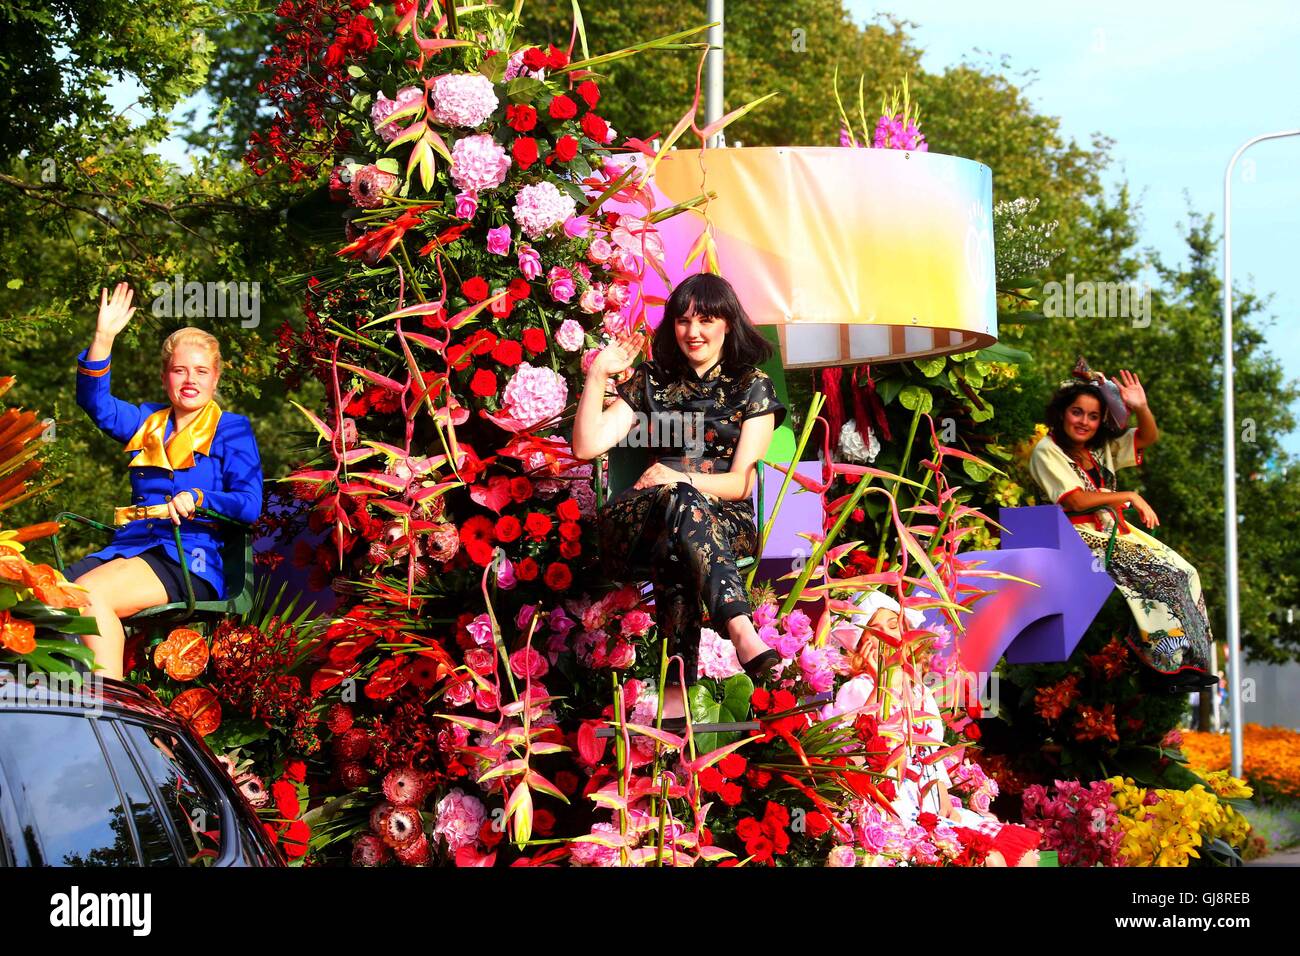 The Hague, Netherlands. 13th Aug, 2016. Three women greet the audience on a float during the Flower Parade in Noordwijk, the Netherlands, on Aug. 13, 2016. The annual Flower Parade since 1946 was held in Rijnsburg, Katwijk and Noordwijk of the Netherlands on Saturday. Credit:  Gong Bing/Xinhua/Alamy Live News Stock Photo